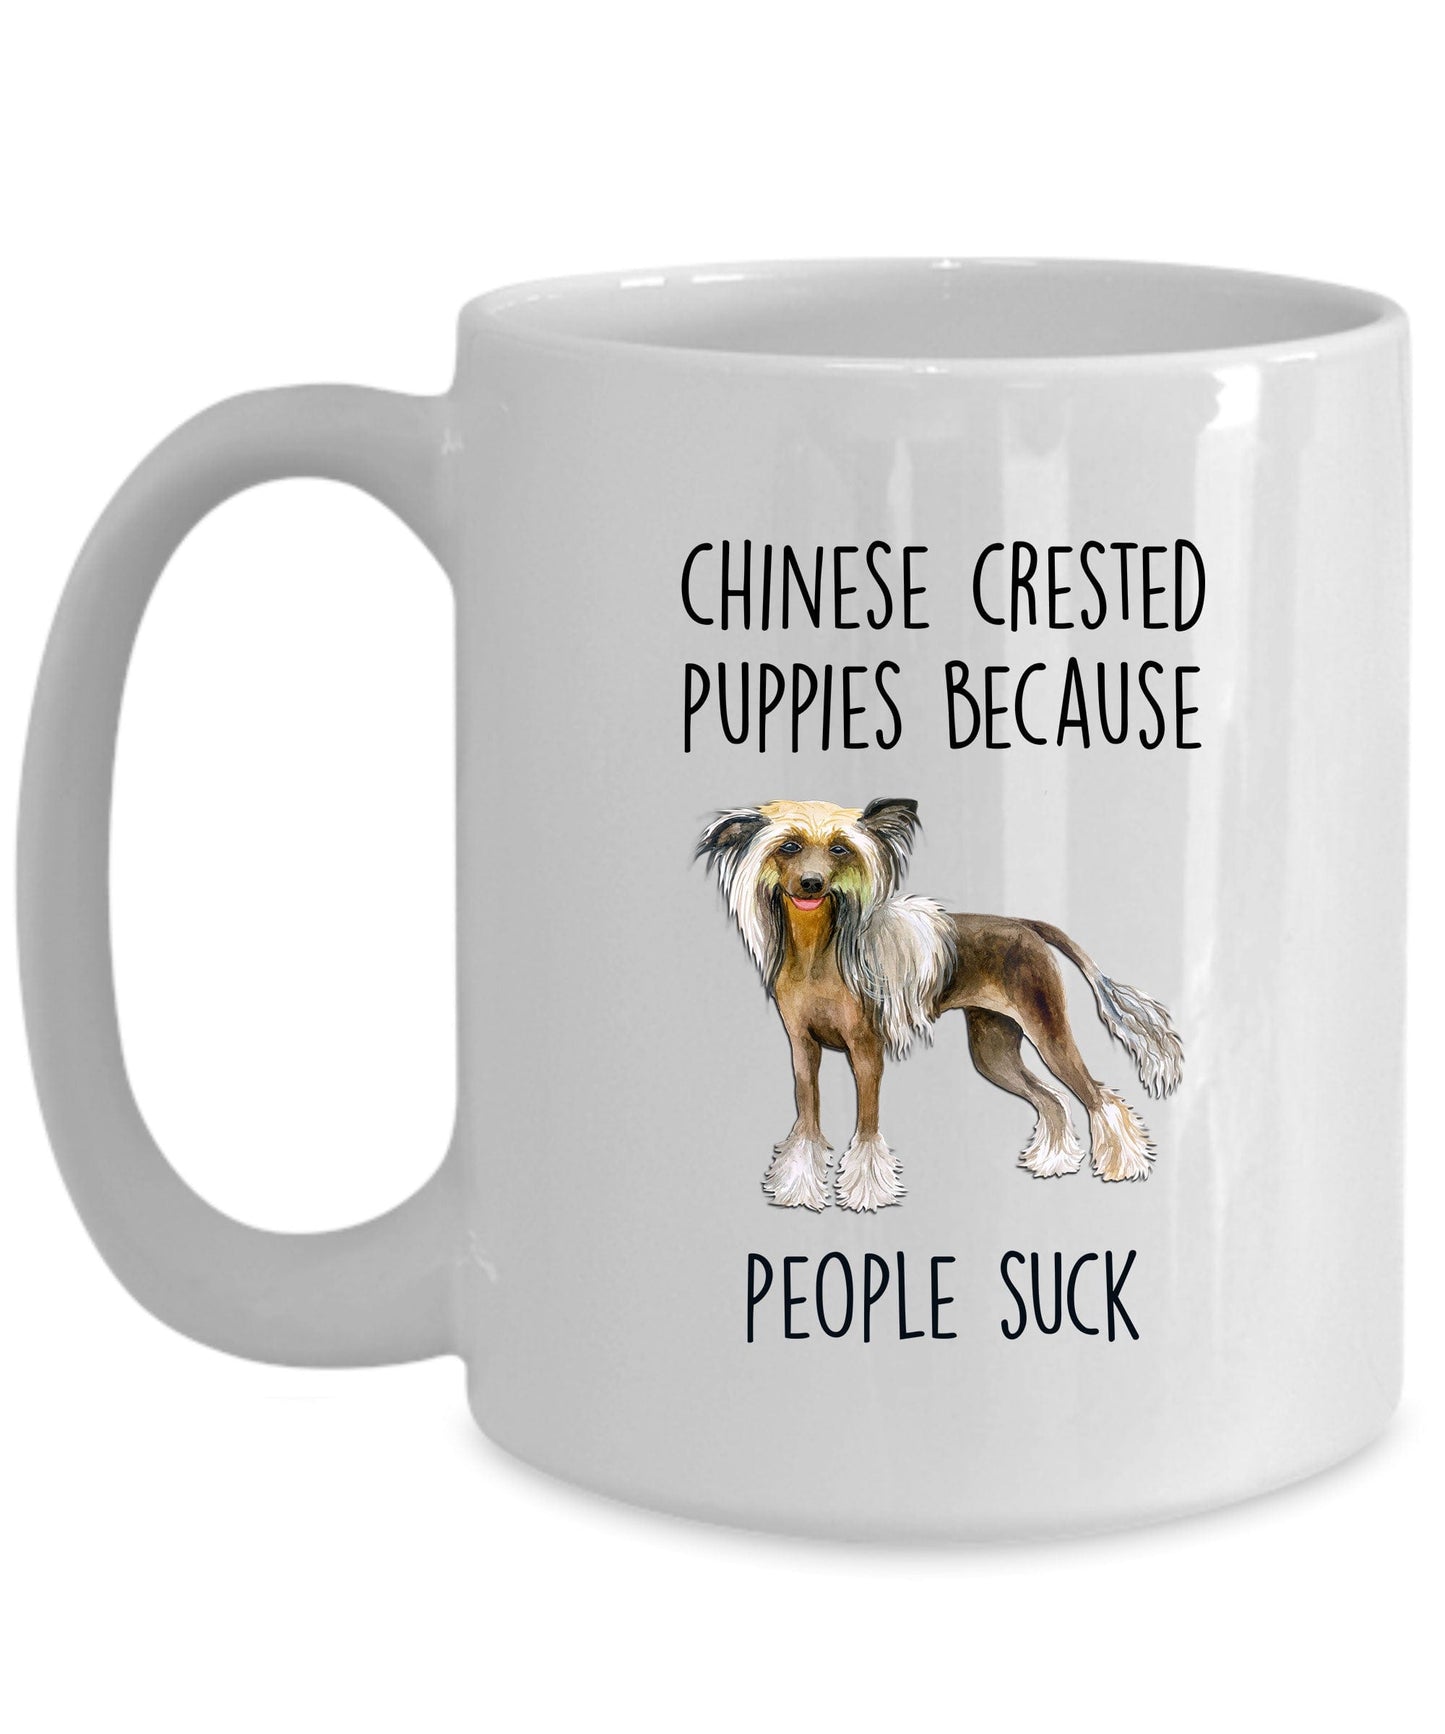 Chinese Crested Dog Funny Ceramic Coffee Mug - Chinese Crested Puppies because people suck